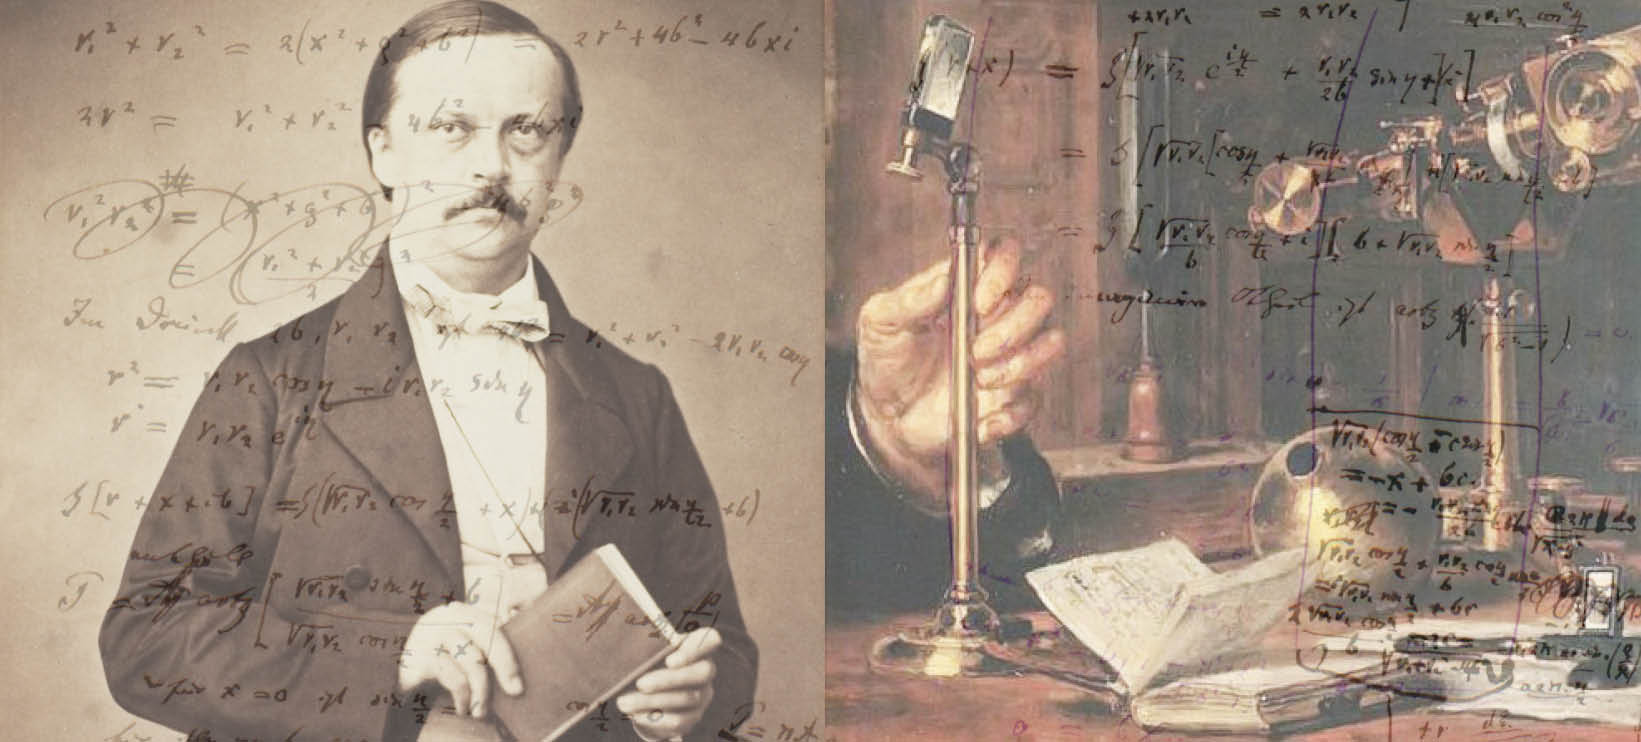 Photograph of Hermann von Helmholtz (Heidelberg, ca. 1858–71, left side) and Detail of a painting by Ludwig Knaus, 1881, showing Helmholtz with acoustical and optical instruments and a notebook (right side) and Background: Pages from Helmholtz's lecture notebook (background)